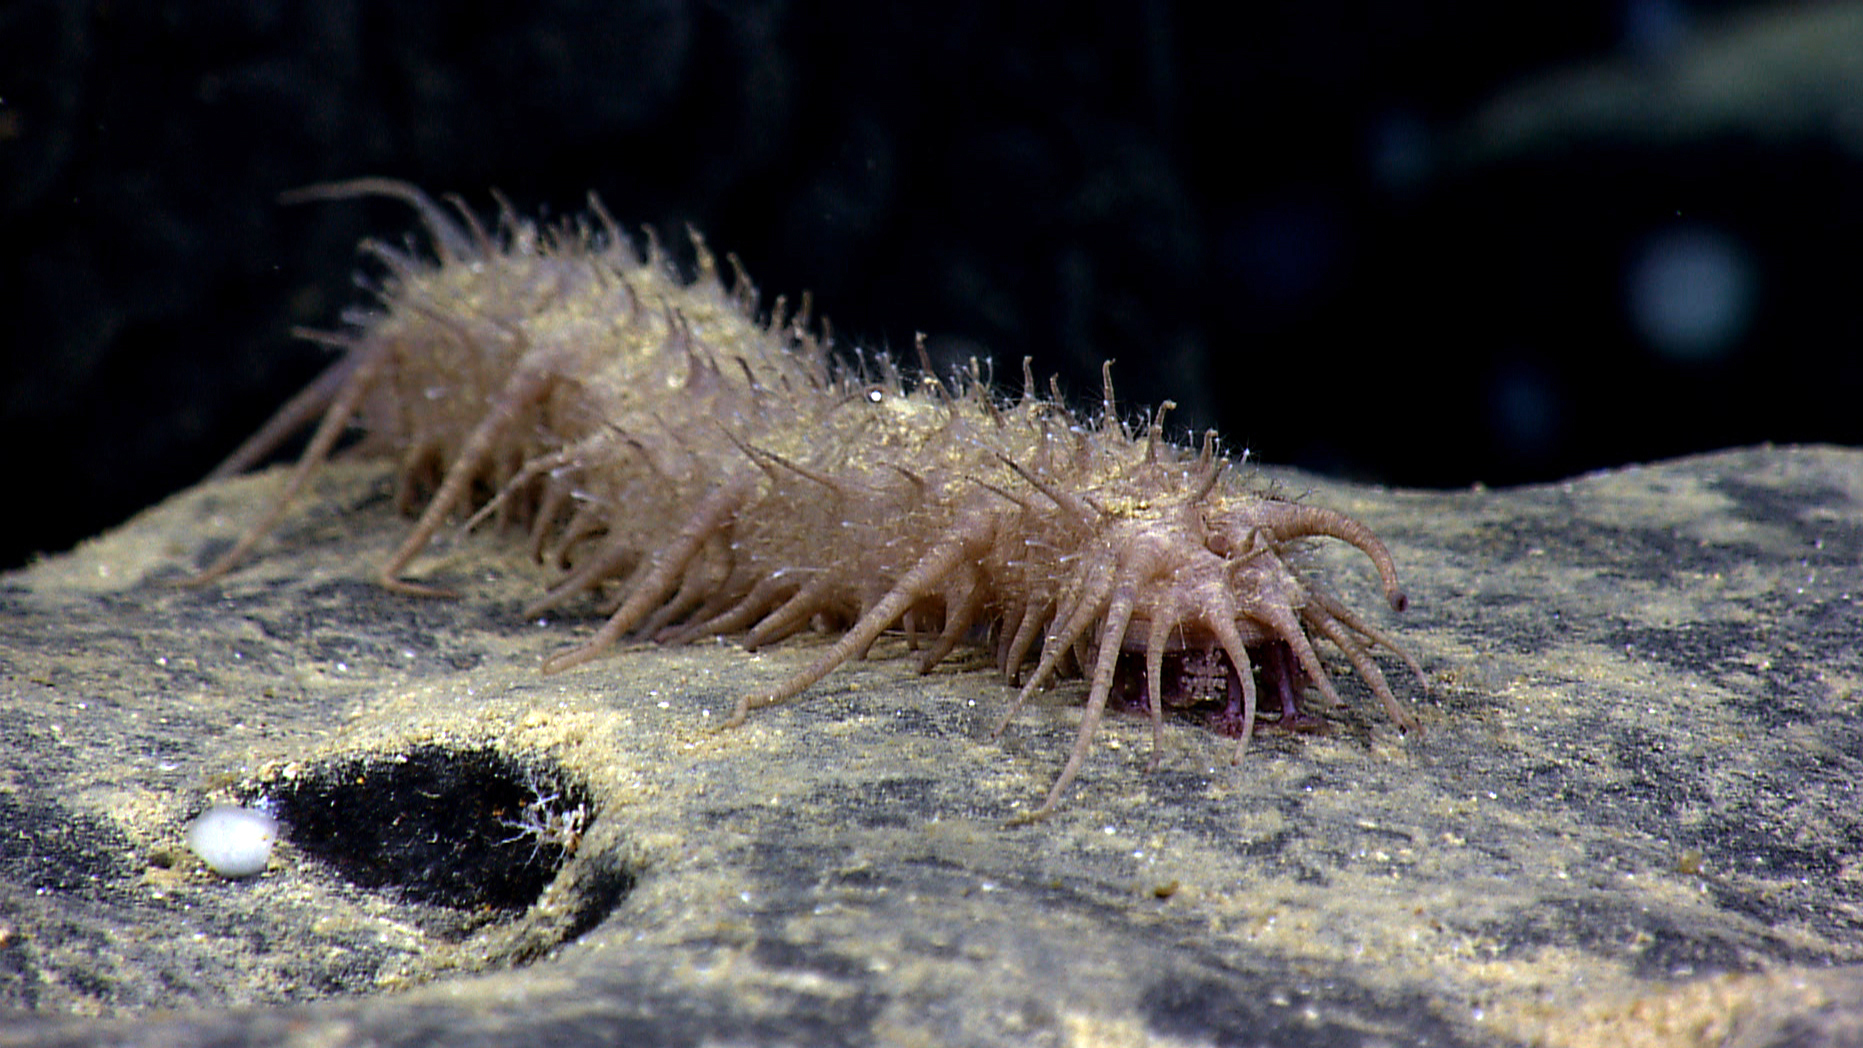 Sea cucumbers fill a role in the deep ocean similar to that of earthworms on land, breaking down and recycling nutrients for other creatures to use.